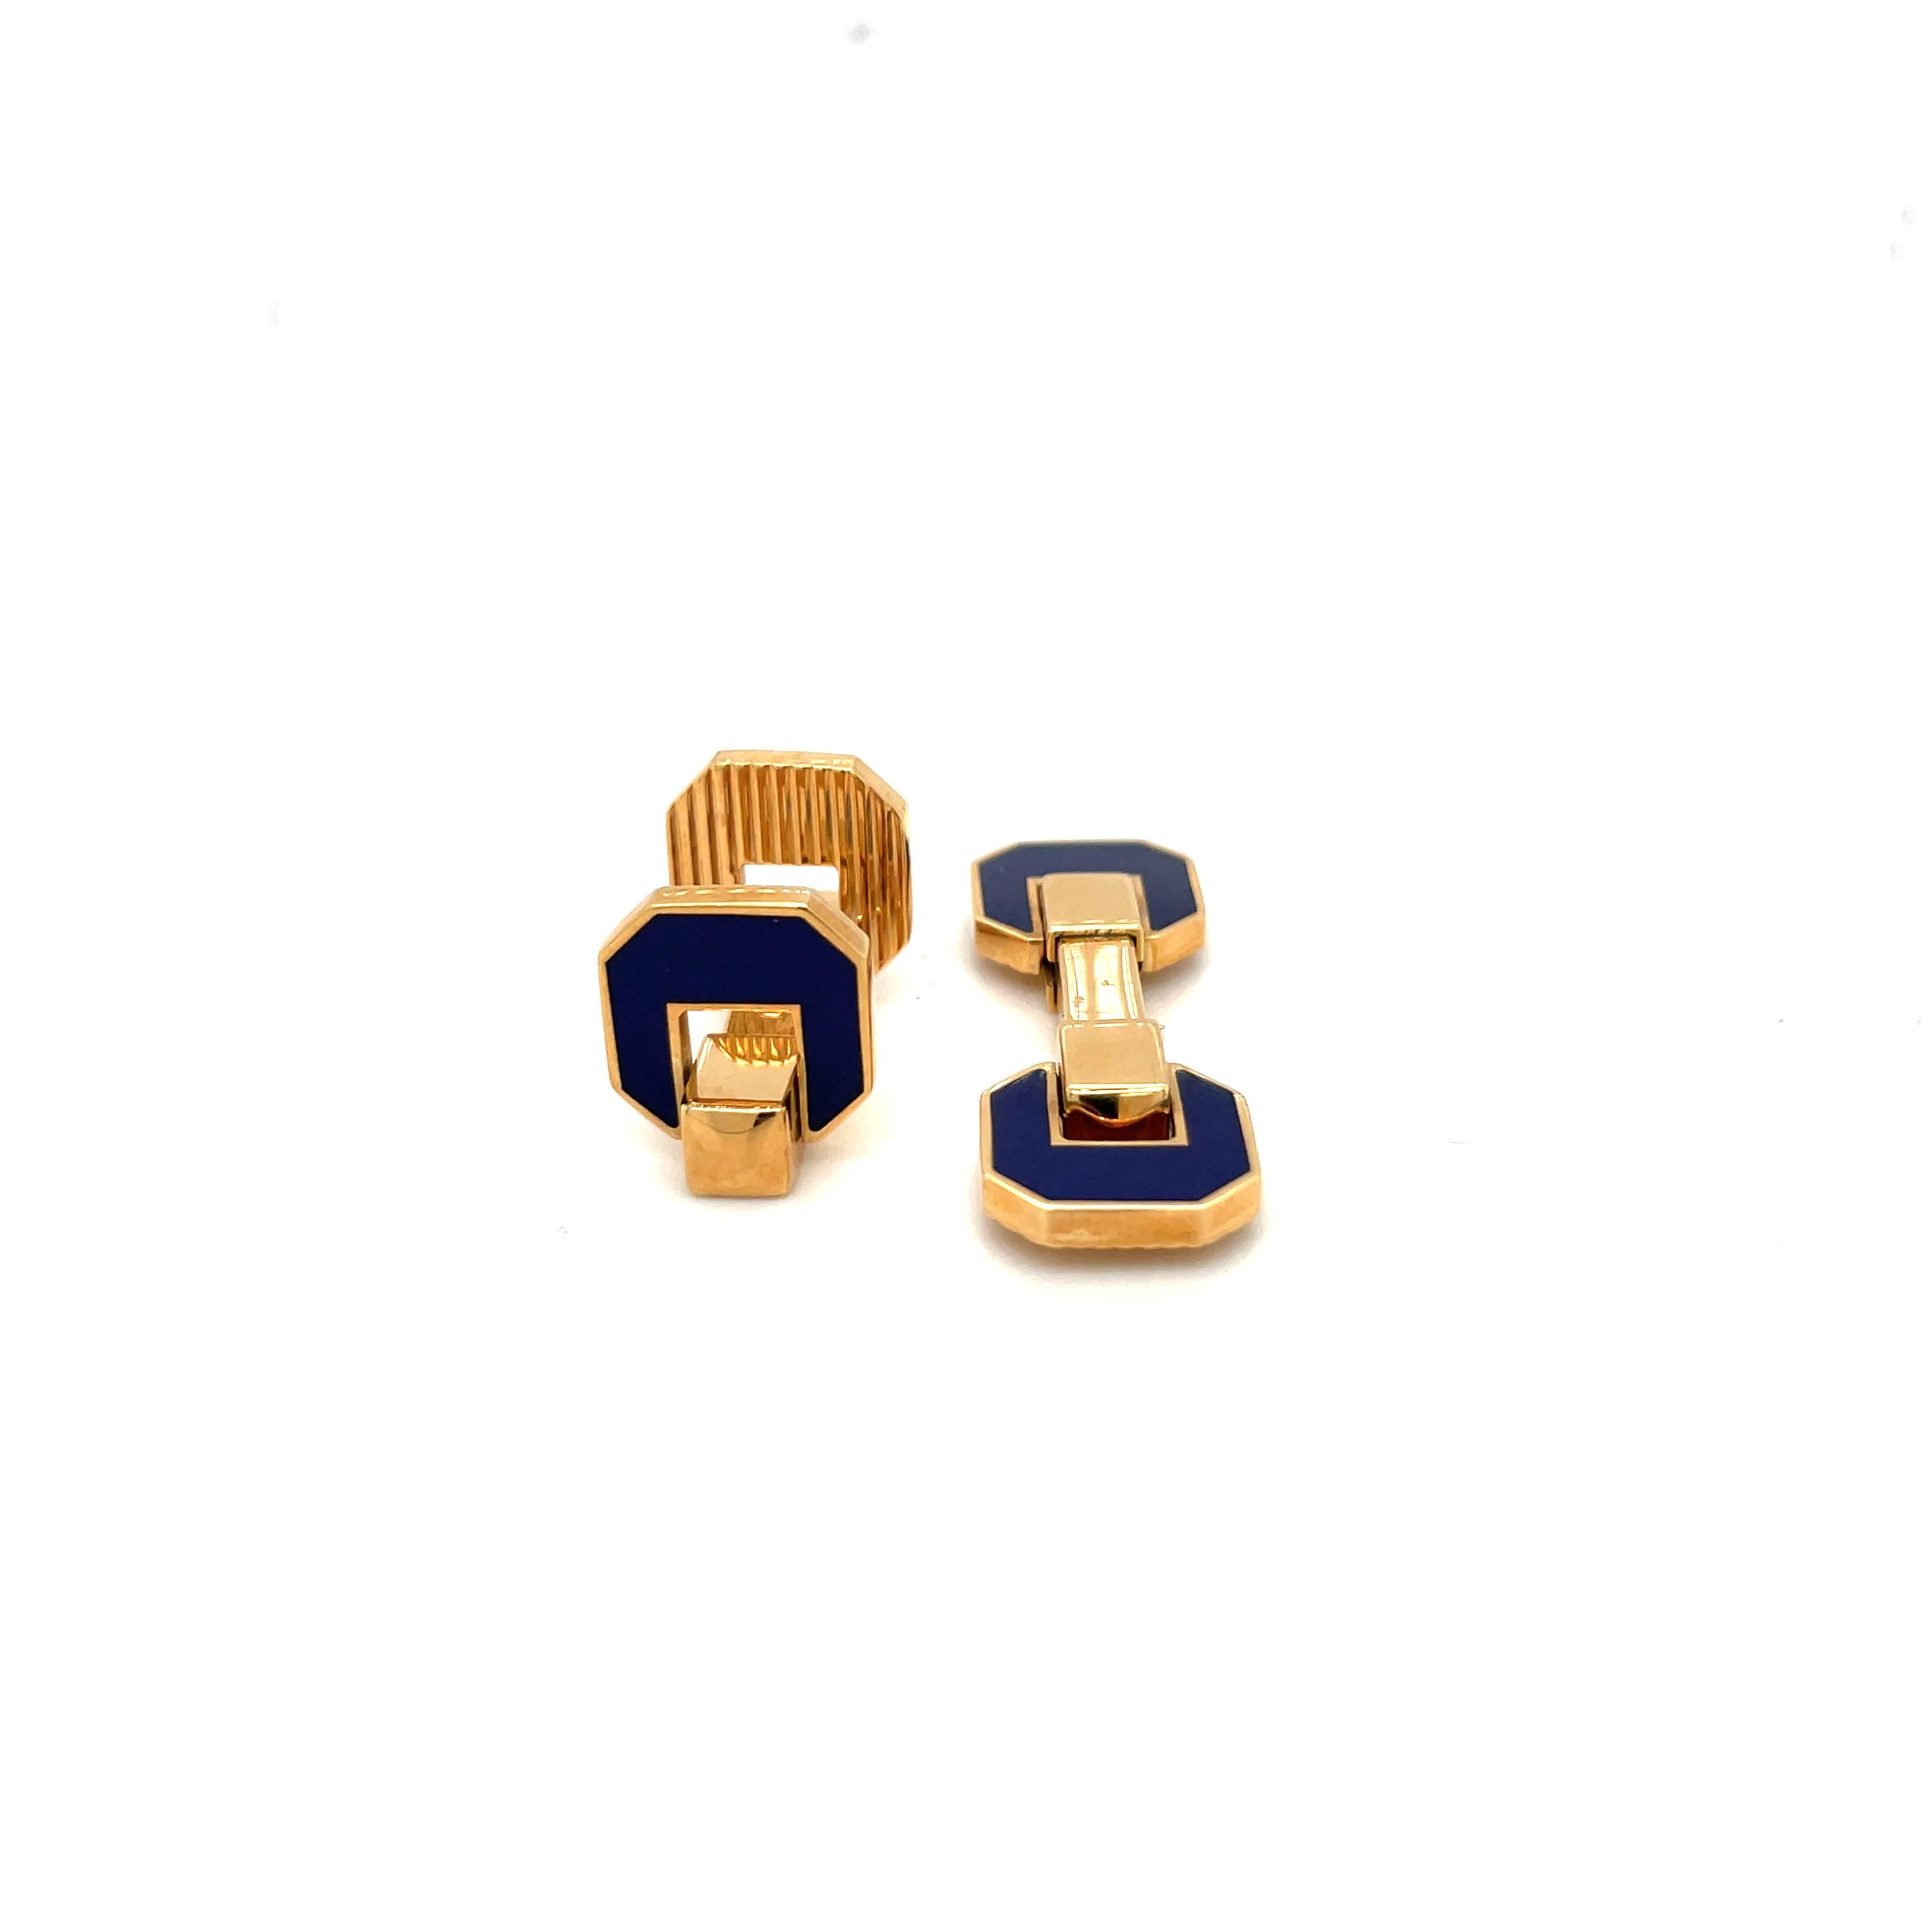 Created by George Gero, renowned worldwide for luxurious men's cuff-links, comes this classic pair in 18 karat yellow gold. The geometric cuff links are the bar style. Each end is set with blue enamel on one side, and yellow gold on the other. They